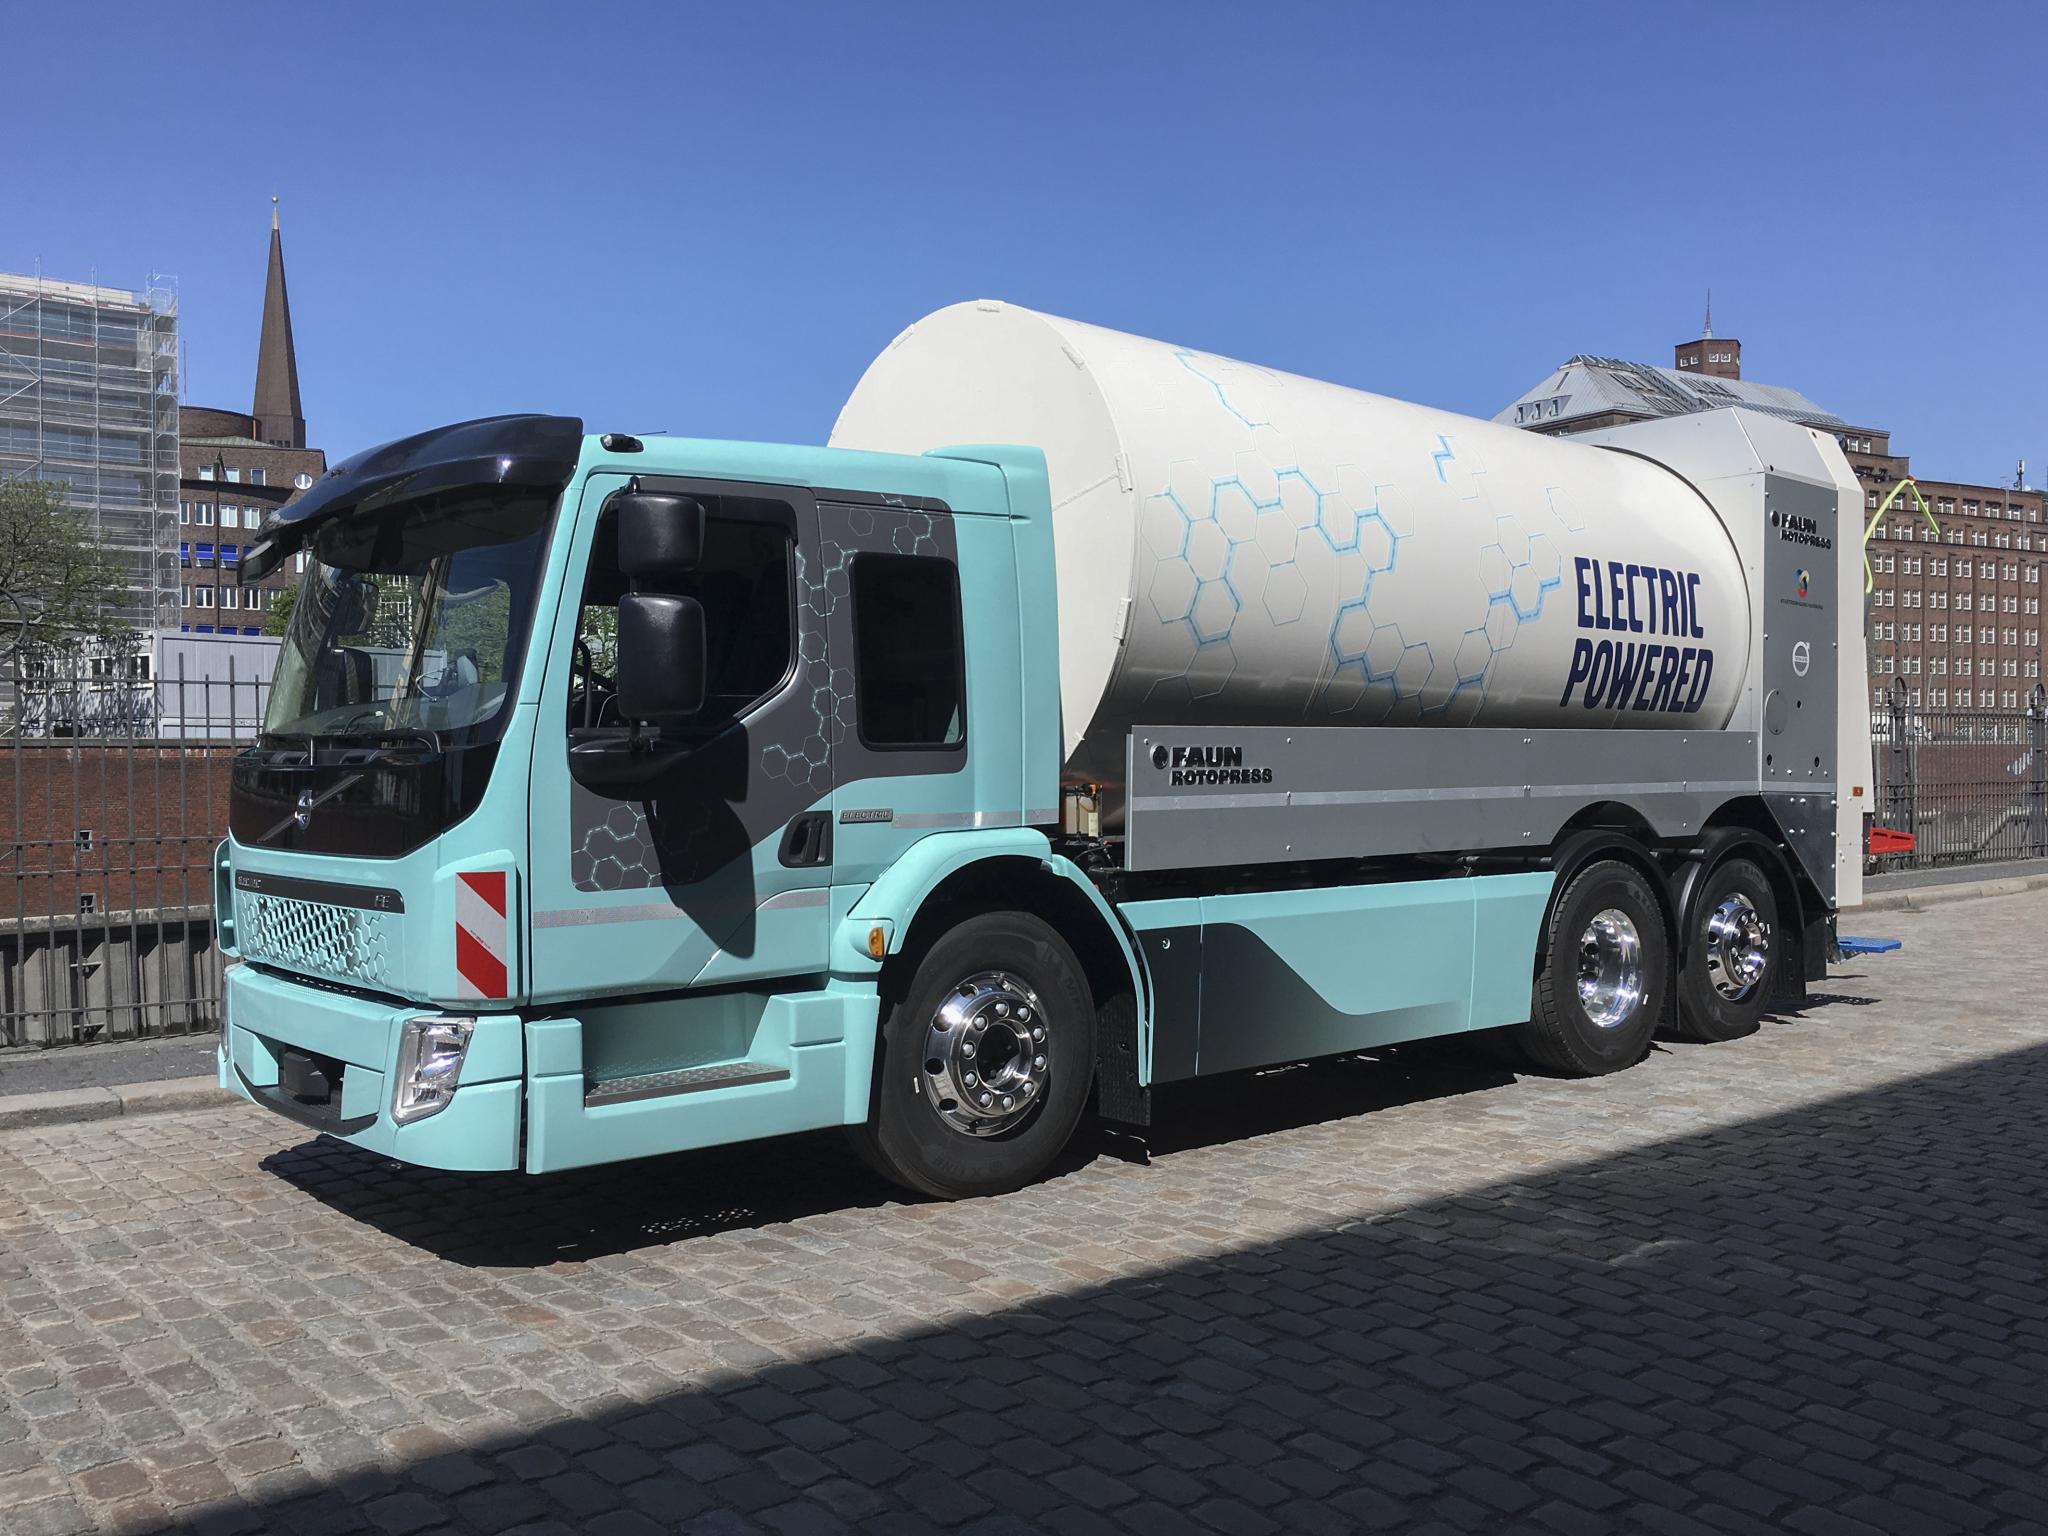  volvo-to-manufacture-fully-electric-heavy-duty-truck-in-2022-ft 